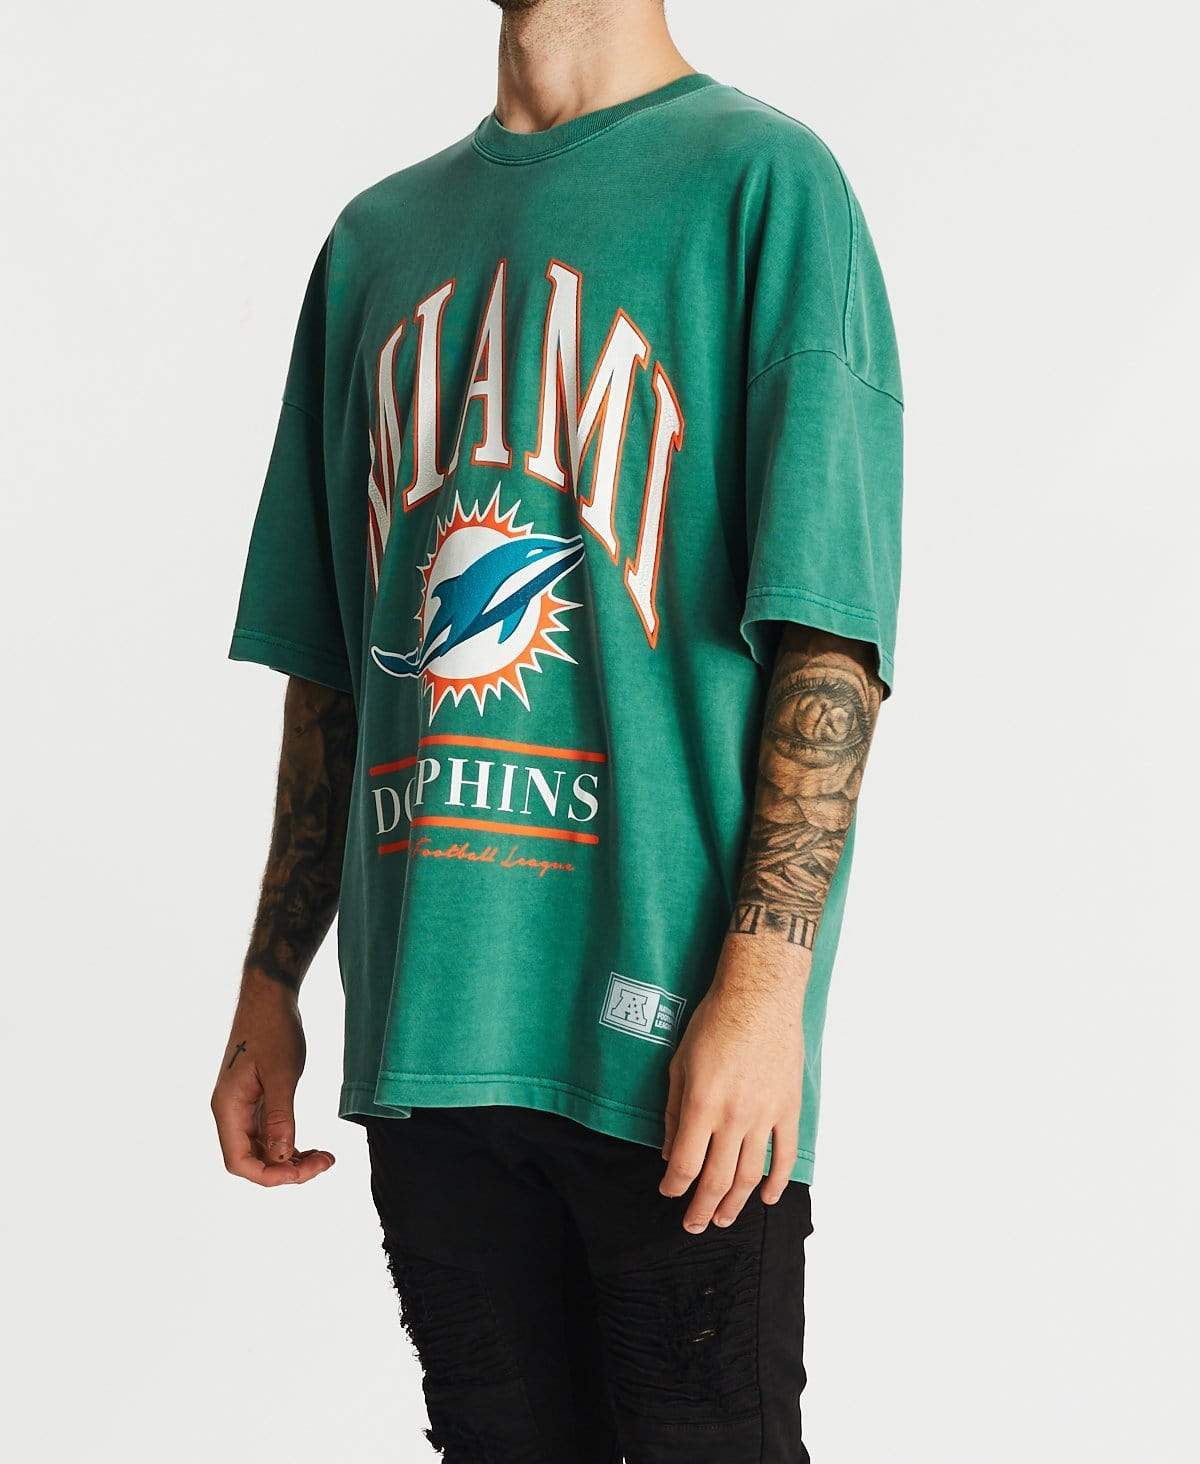 Miami Dolphins Vintage NFL Oversized Arch Tee in Teal